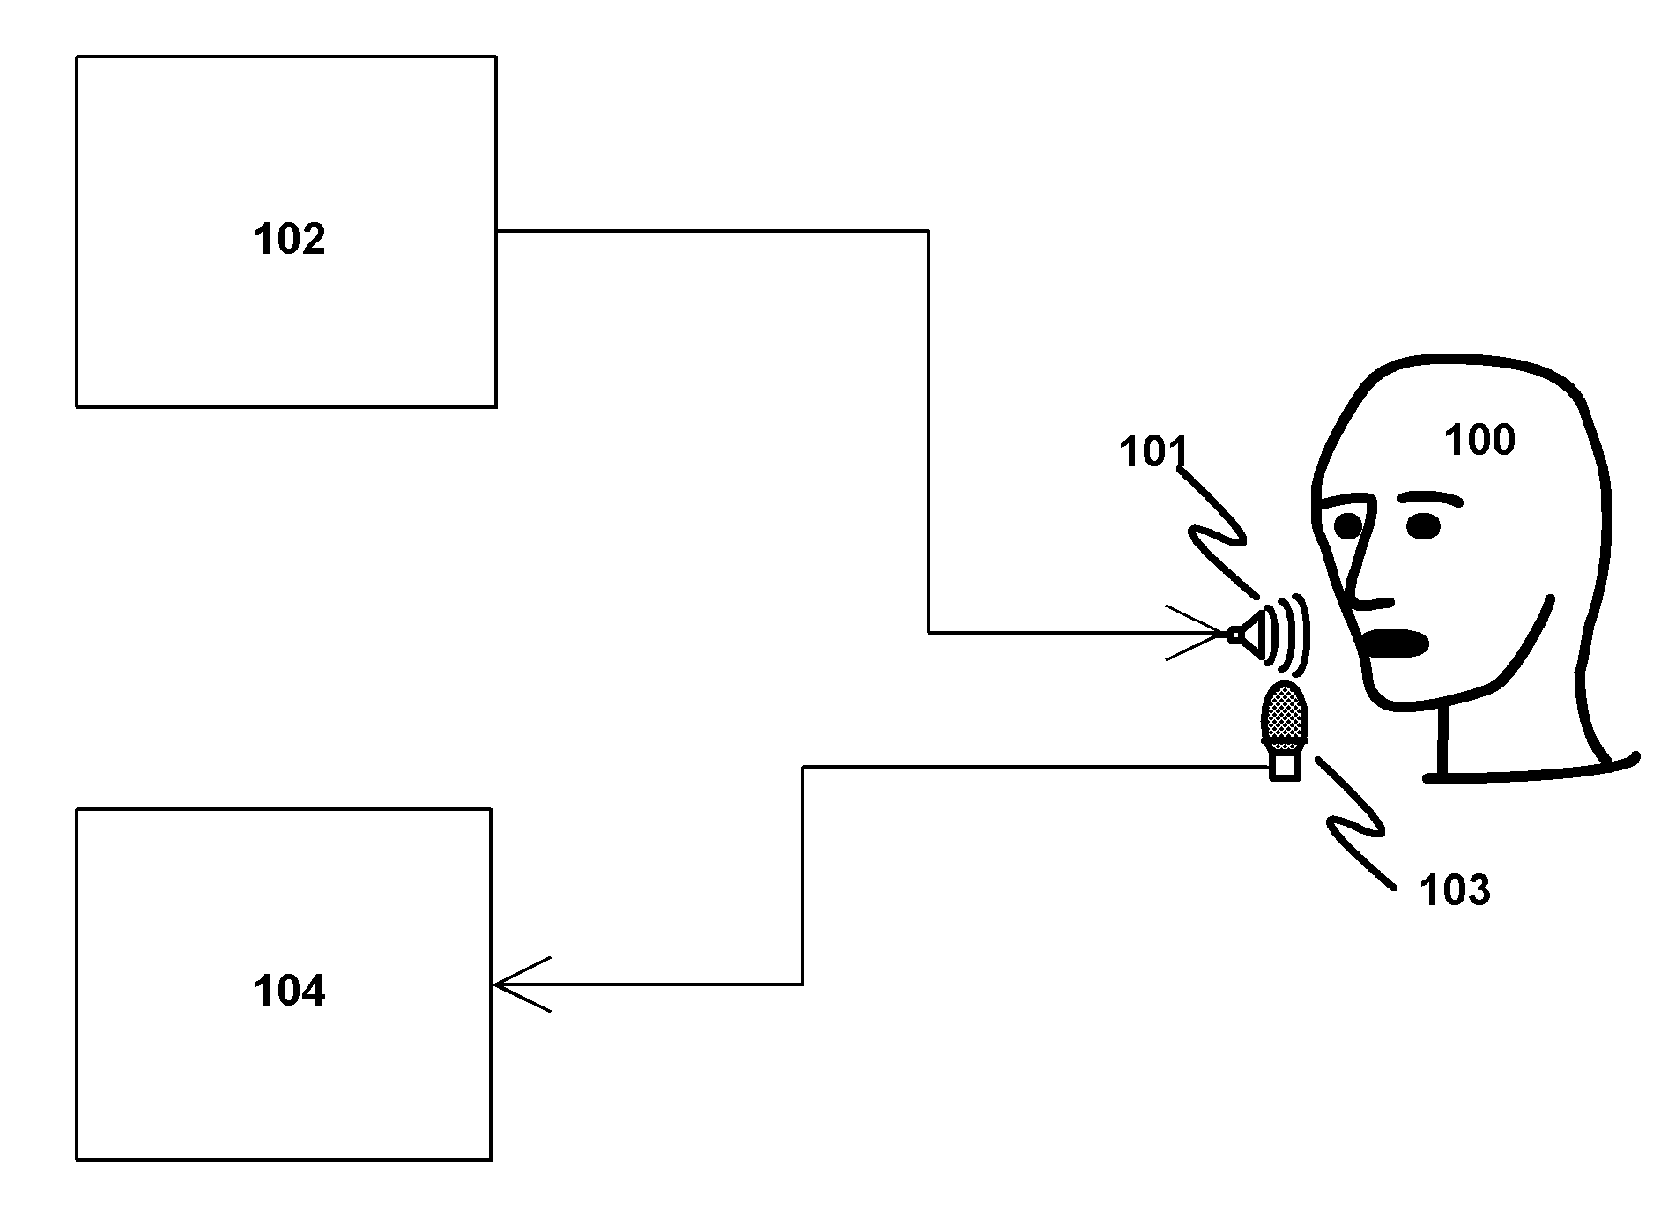 Apparatus and Method for Detecting Speech Using Acoustic Signals Outside the Audible Frequency Range